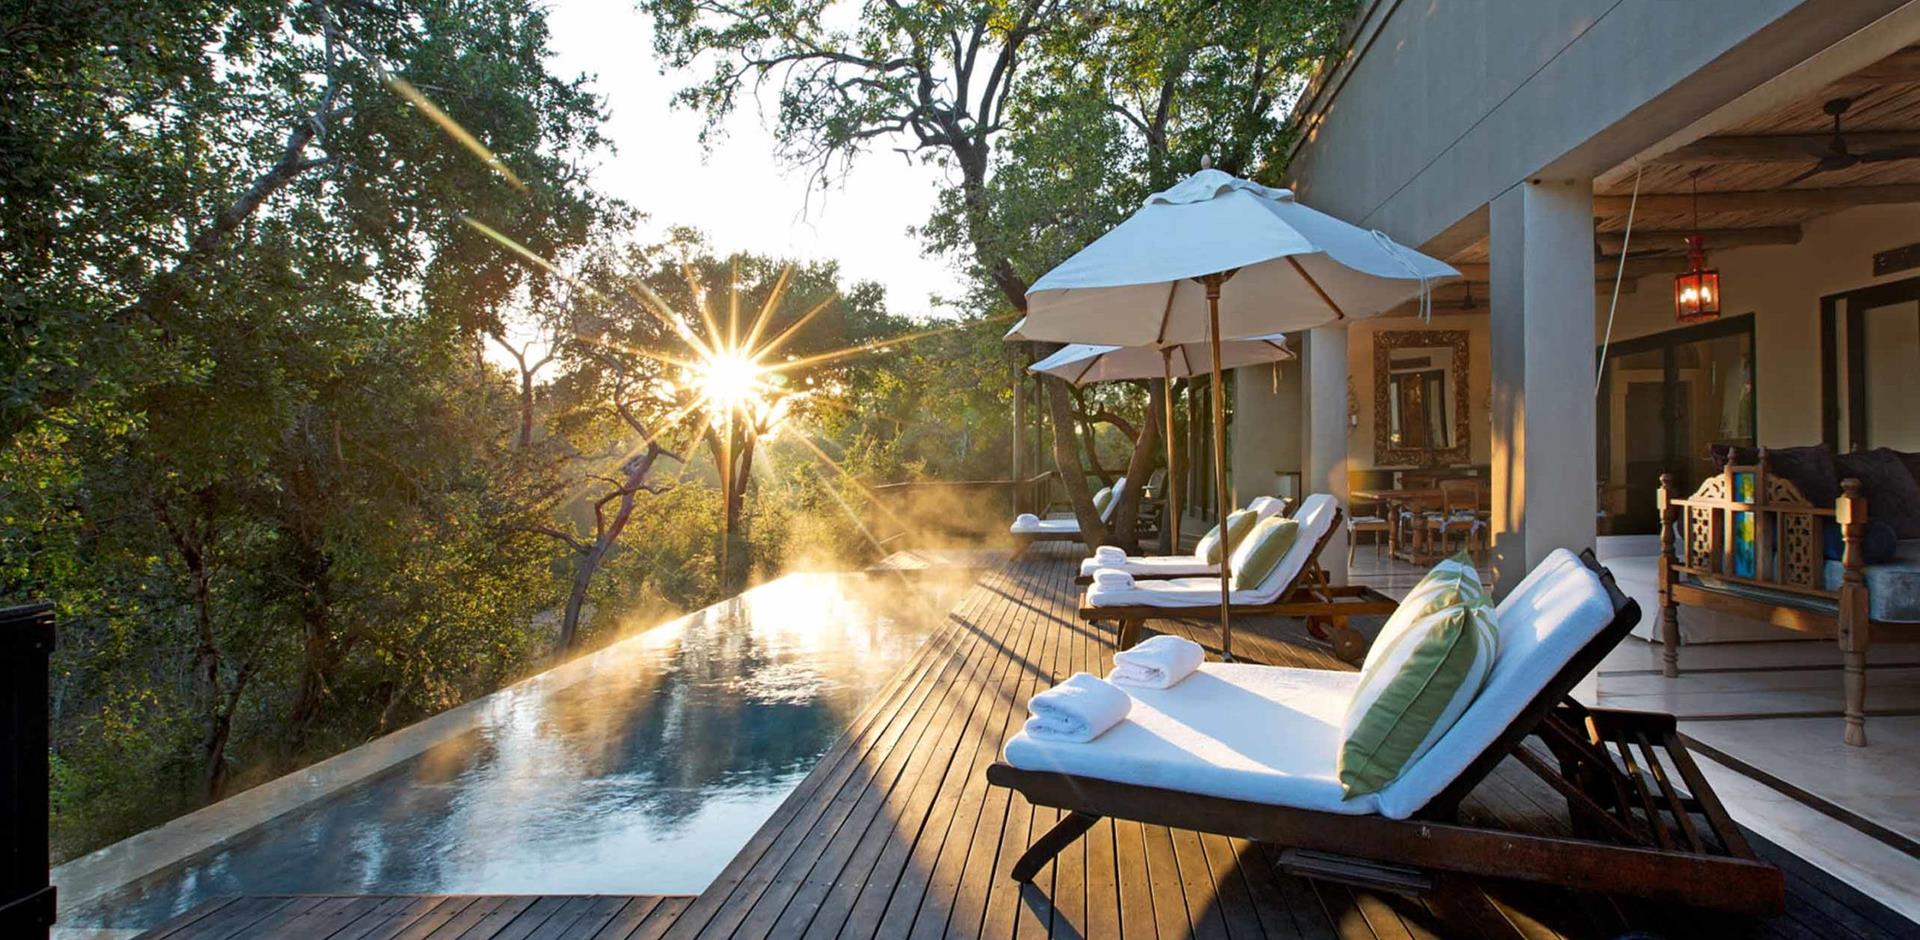 Pool at sunset, Africa House, at Royal Malewane, Kruger National Park, South Africa